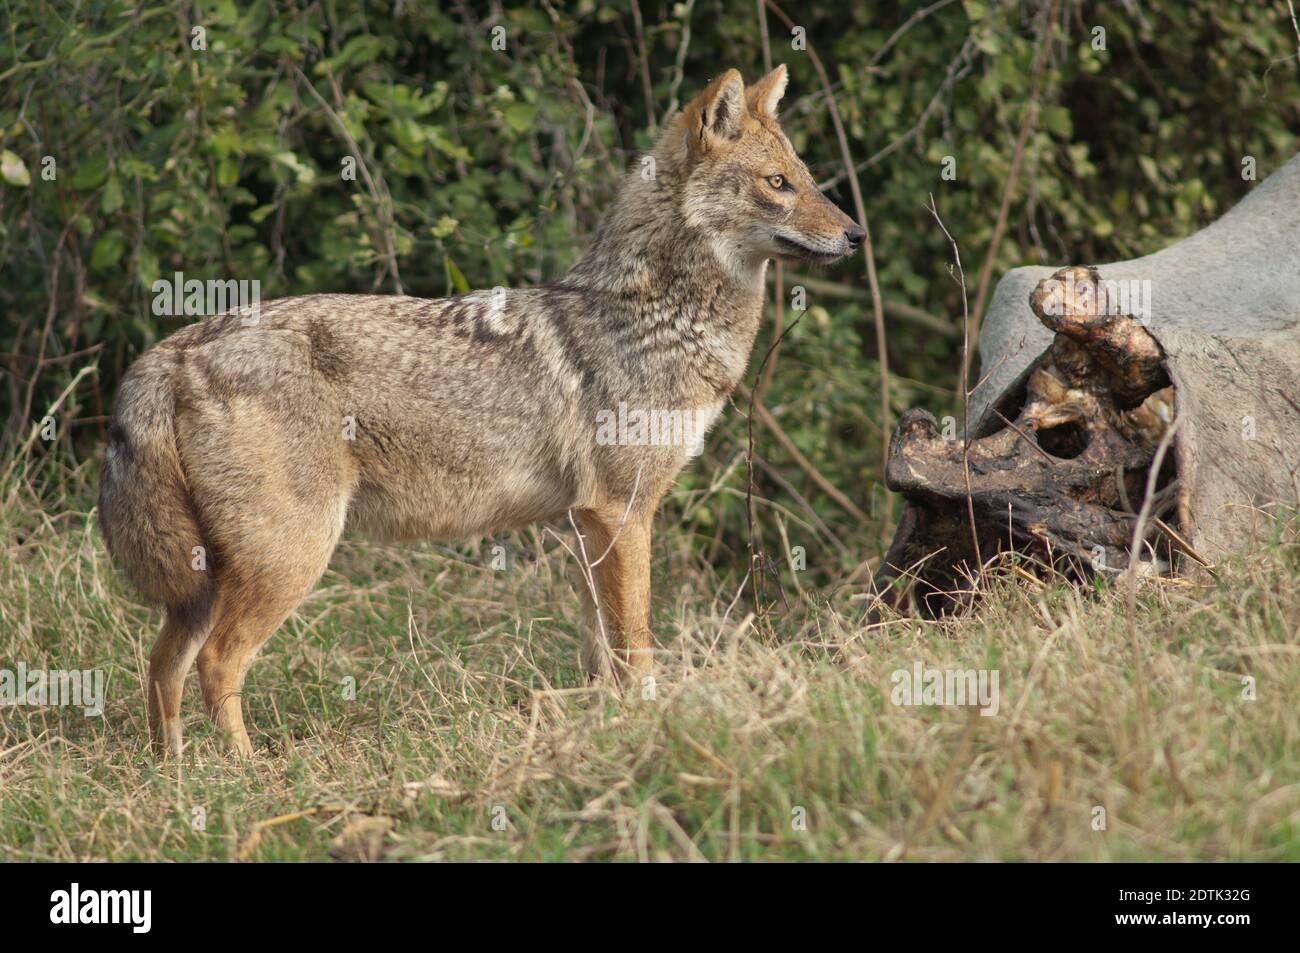 Il jackal d'oro Canis aureus indica accanto ad uno zebù morto. Parco Nazionale Keoladeo Ghana. Bharatpur. Rajasthan. India. Foto Stock